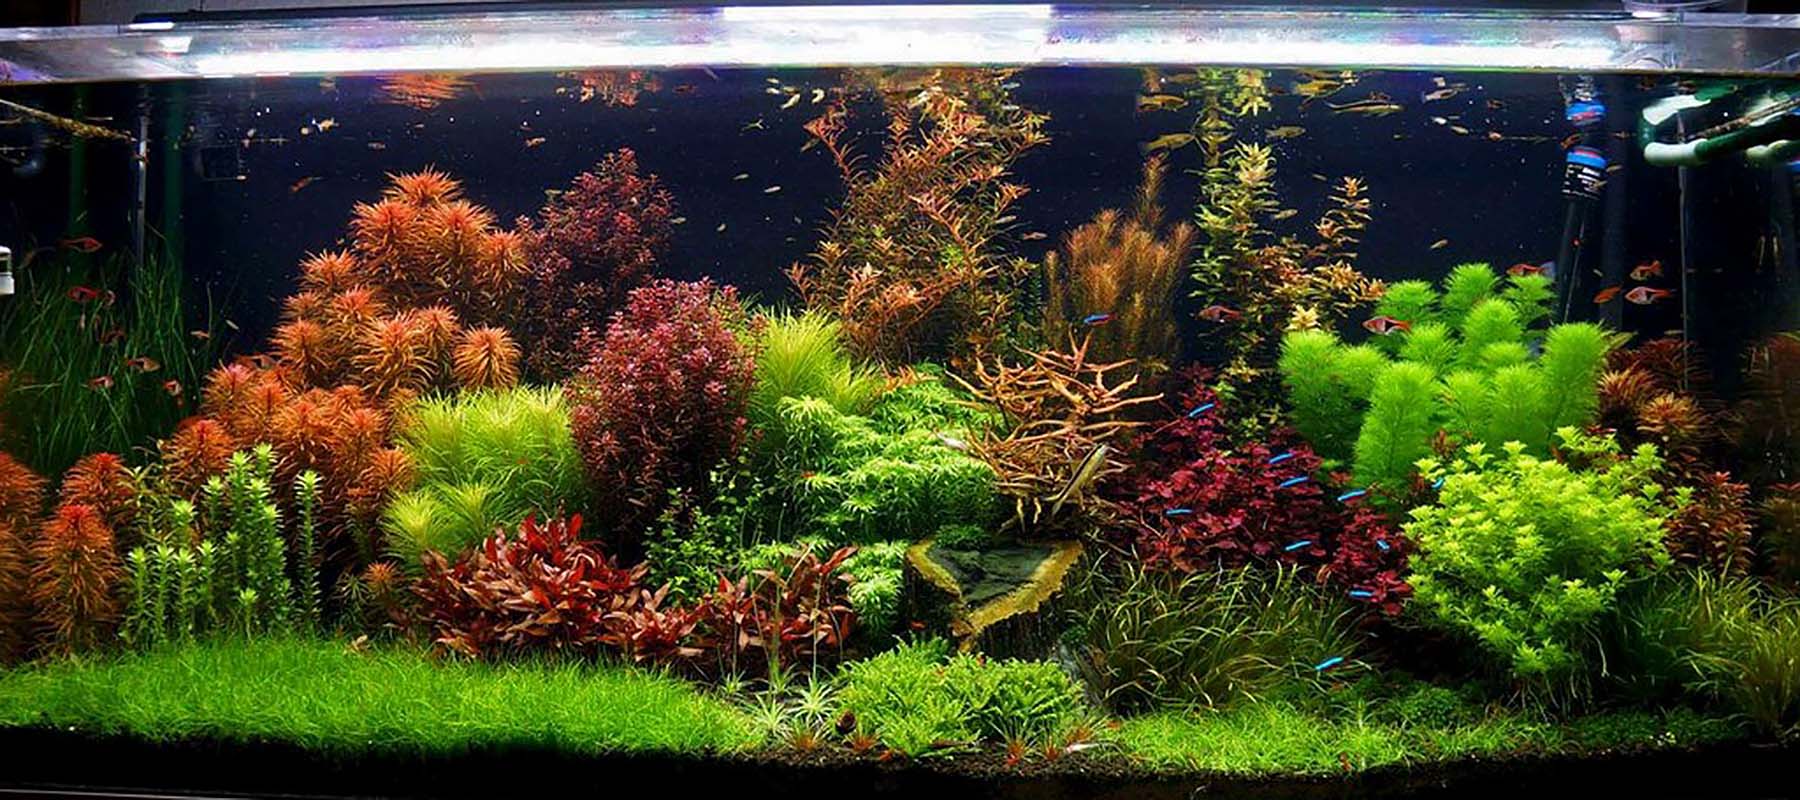 LED - Which is better? - The Aquarist